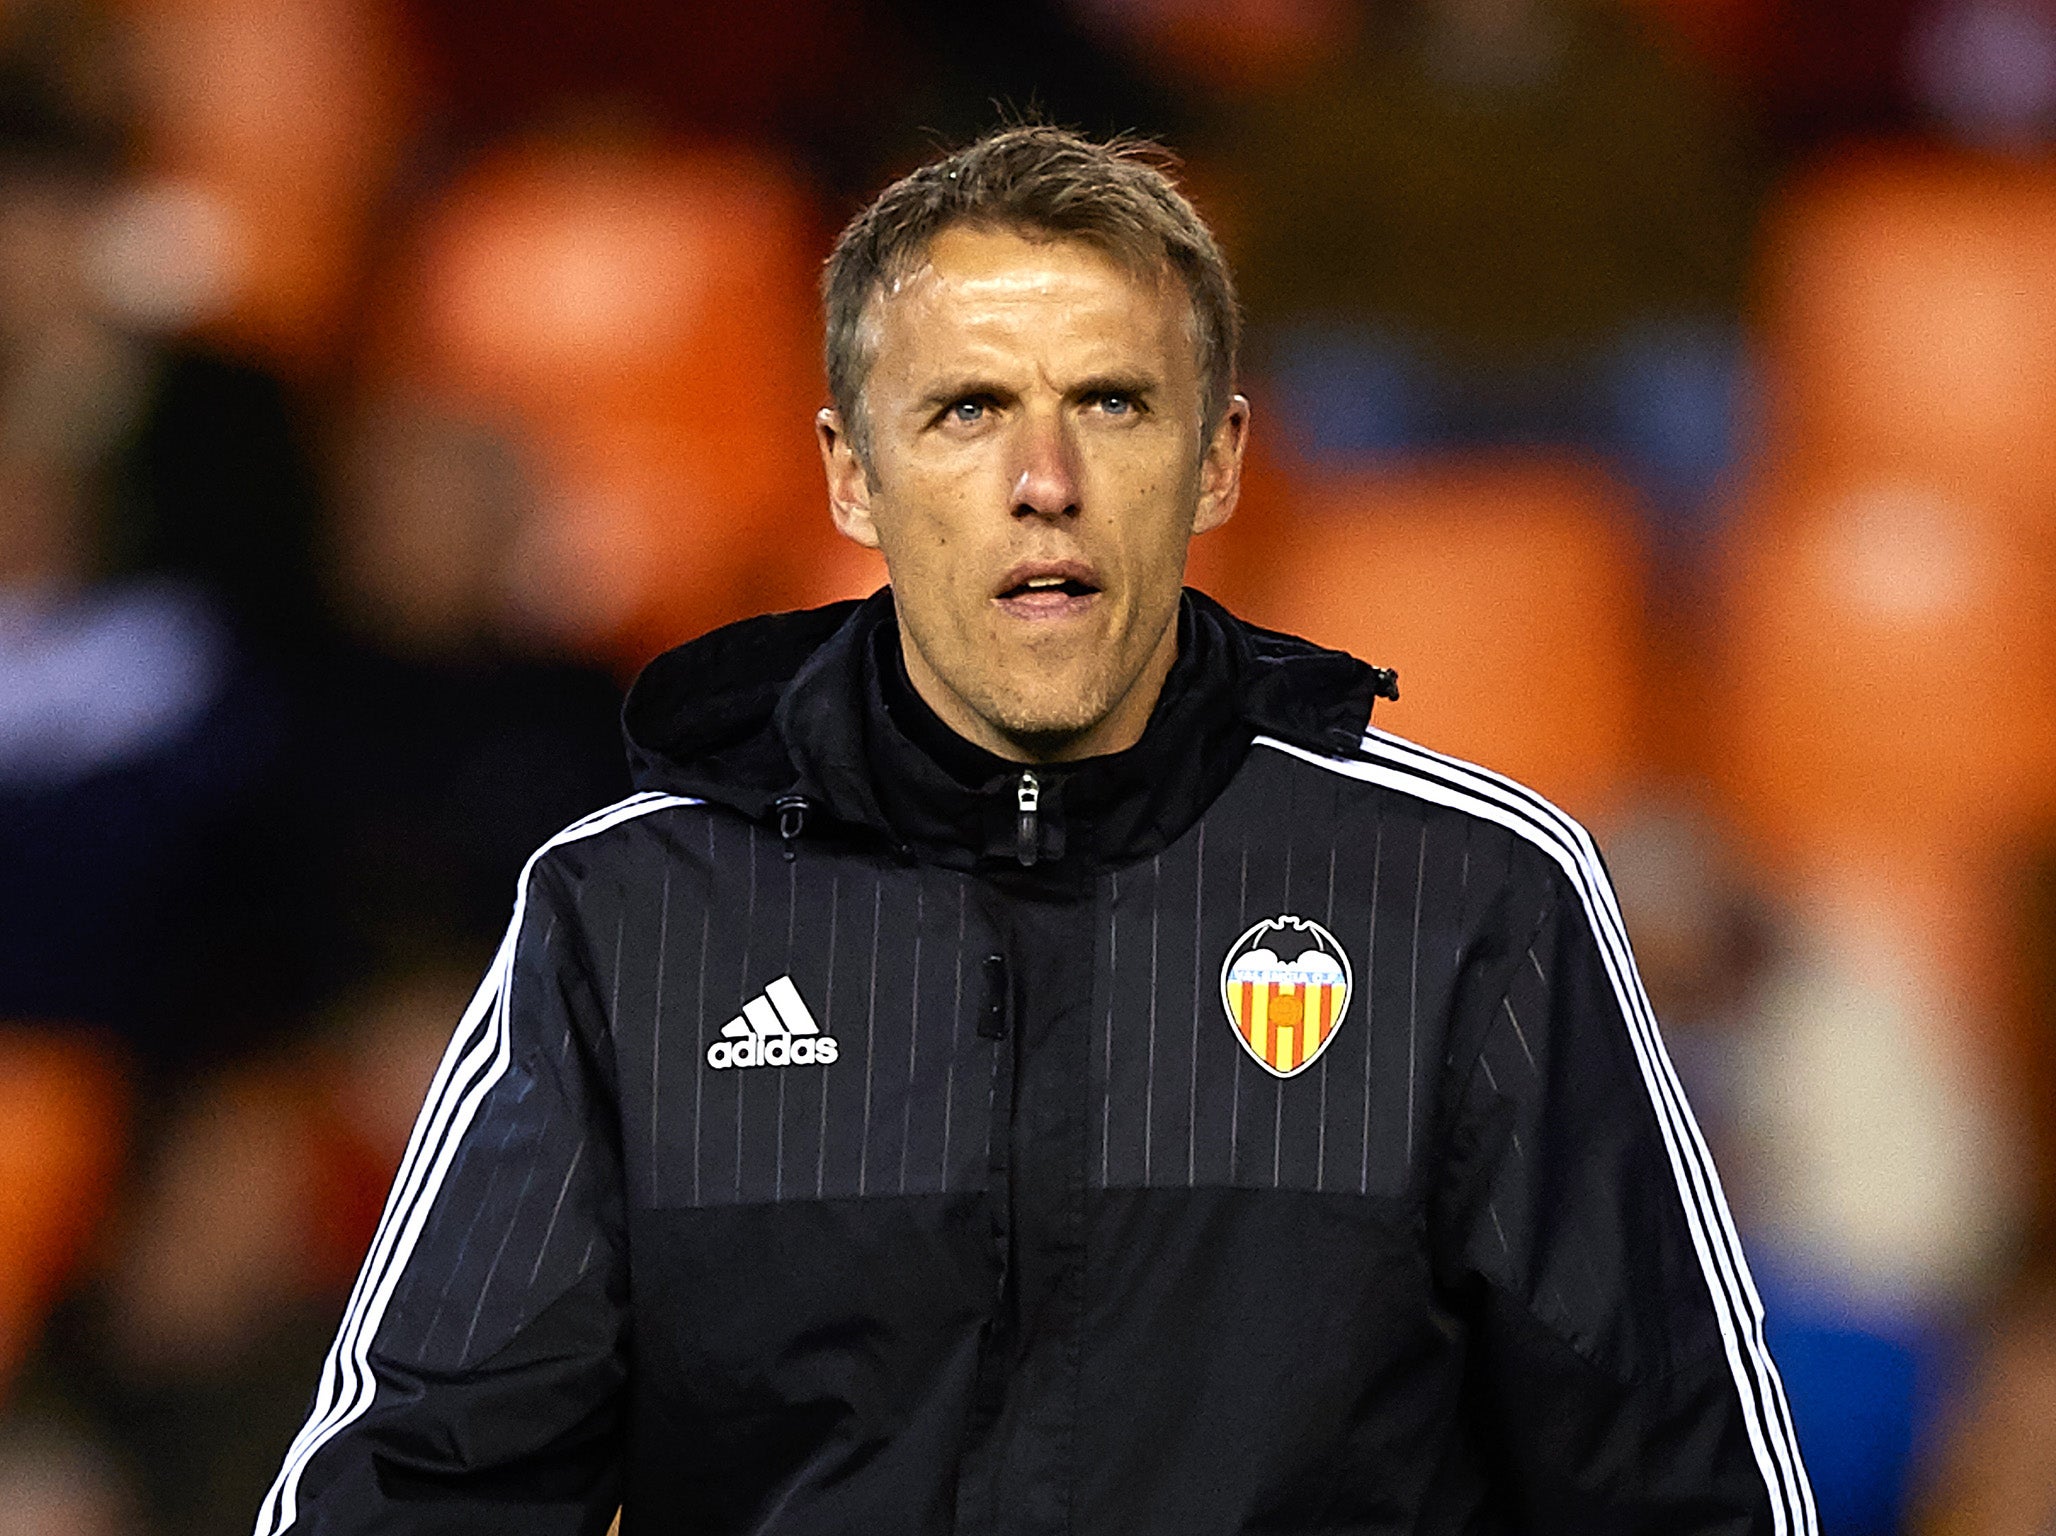 Philip Neville was on the coaching staff at Valencia in 2015-16